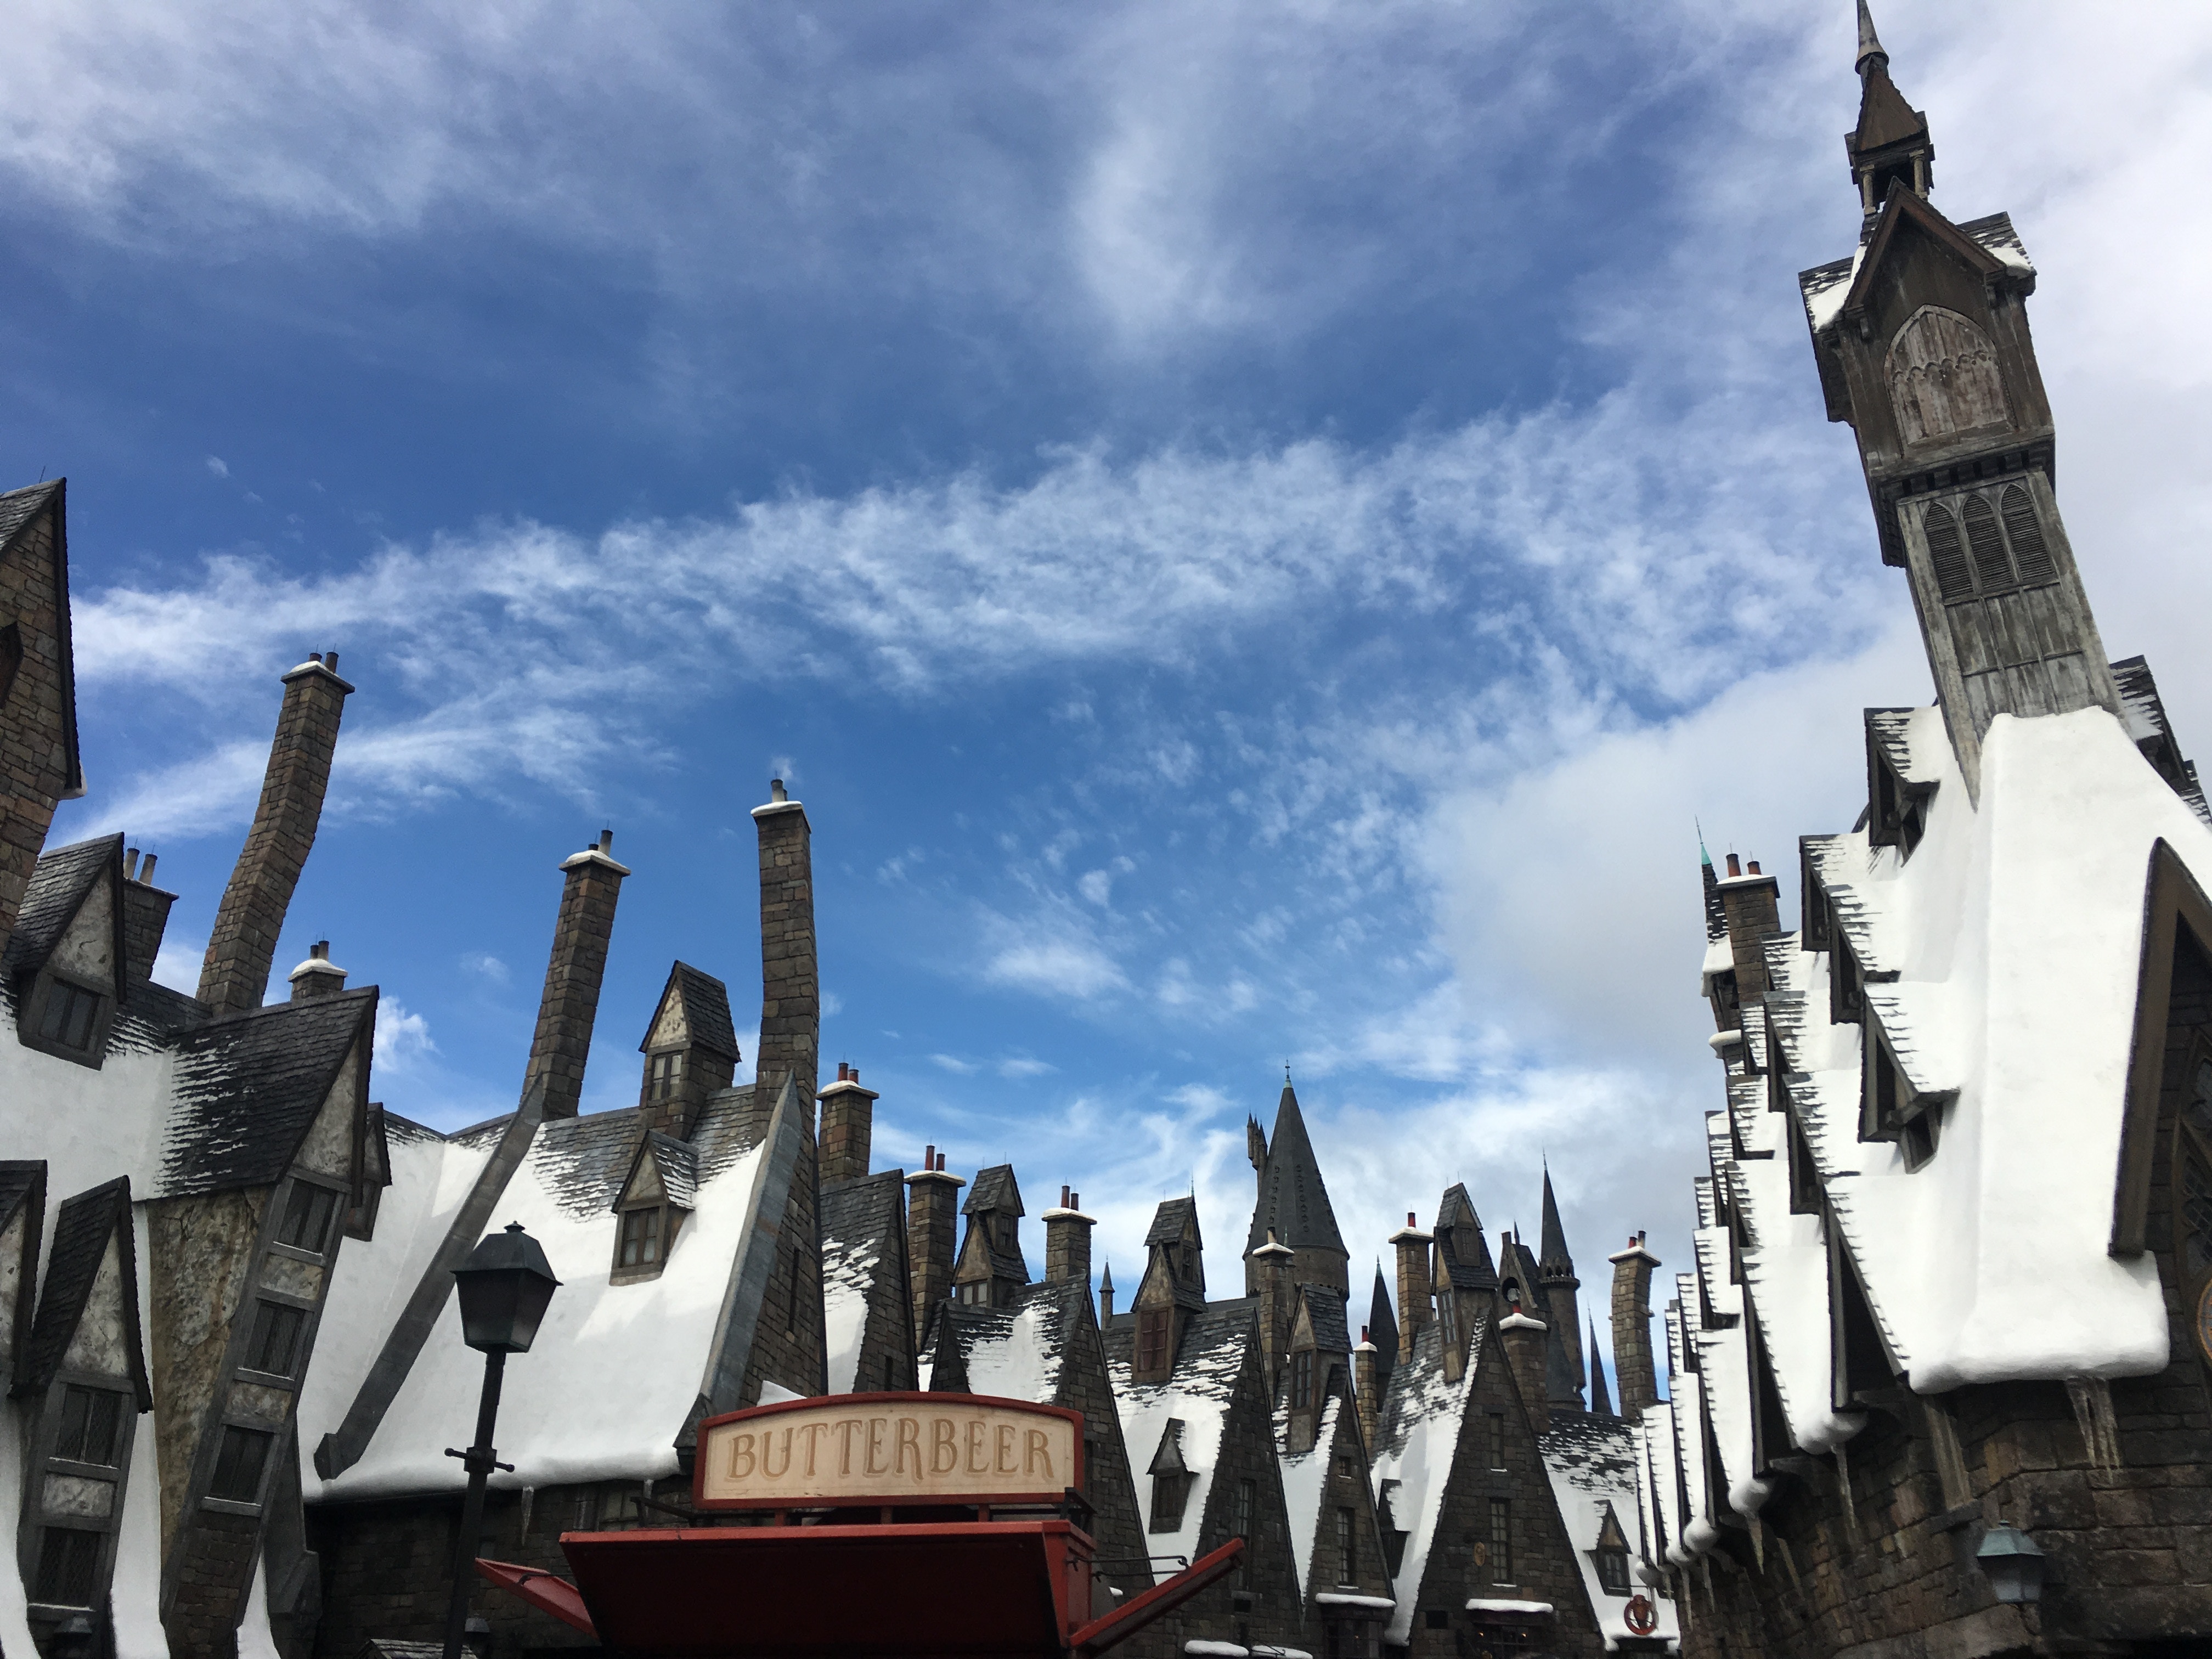 A picture of rooftops from the Harry Potter franchise